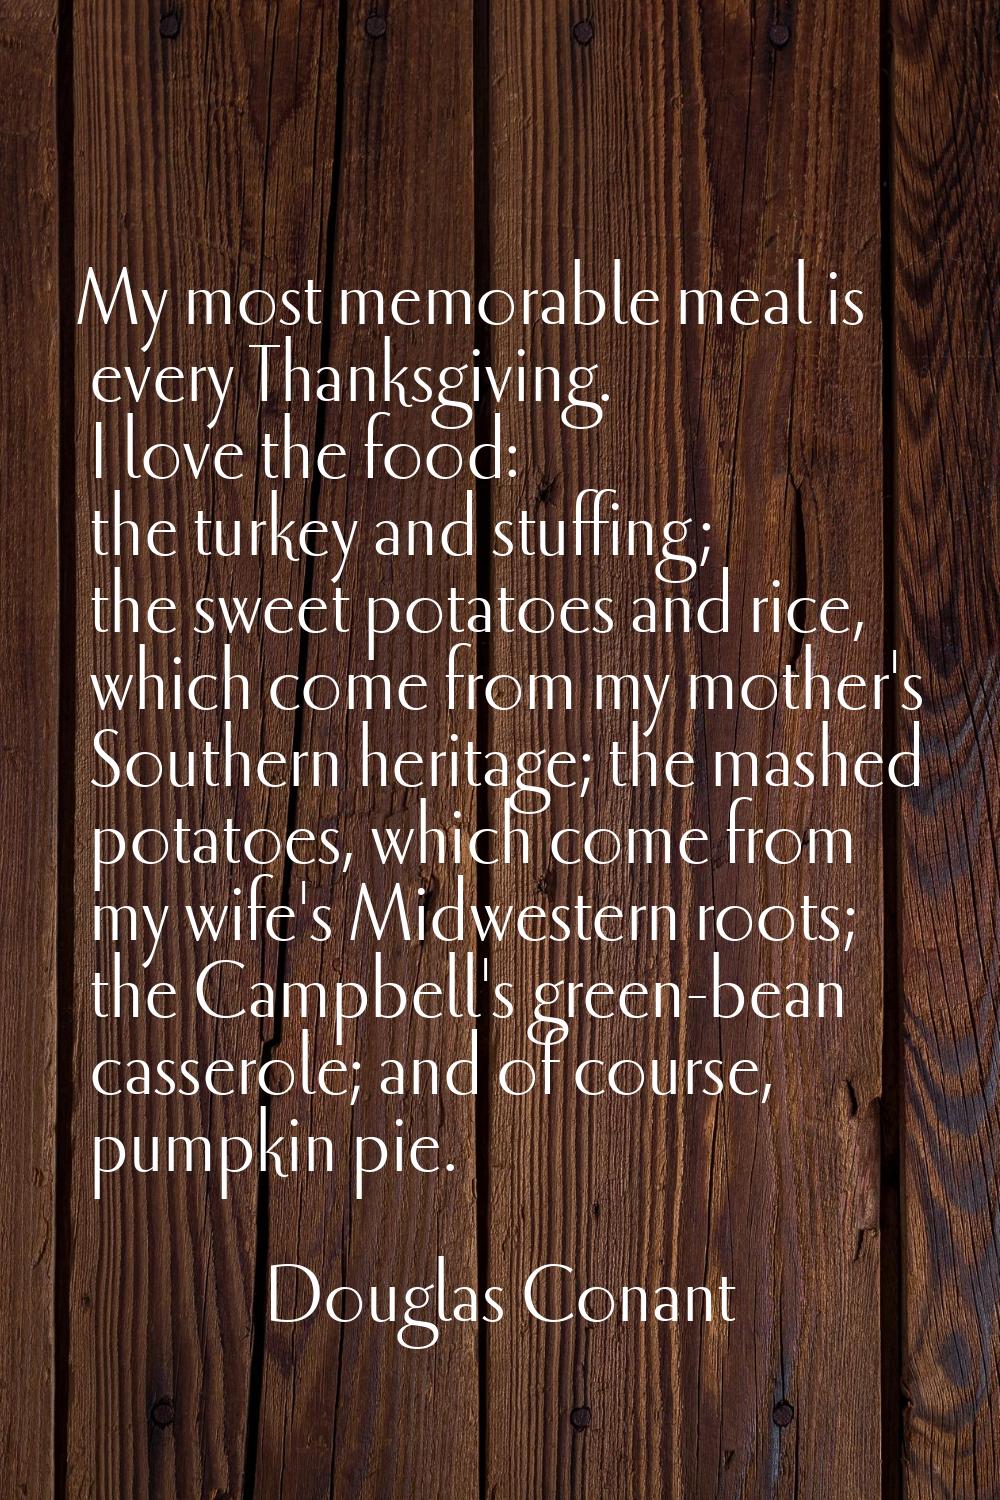 My most memorable meal is every Thanksgiving. I love the food: the turkey and stuffing; the sweet p